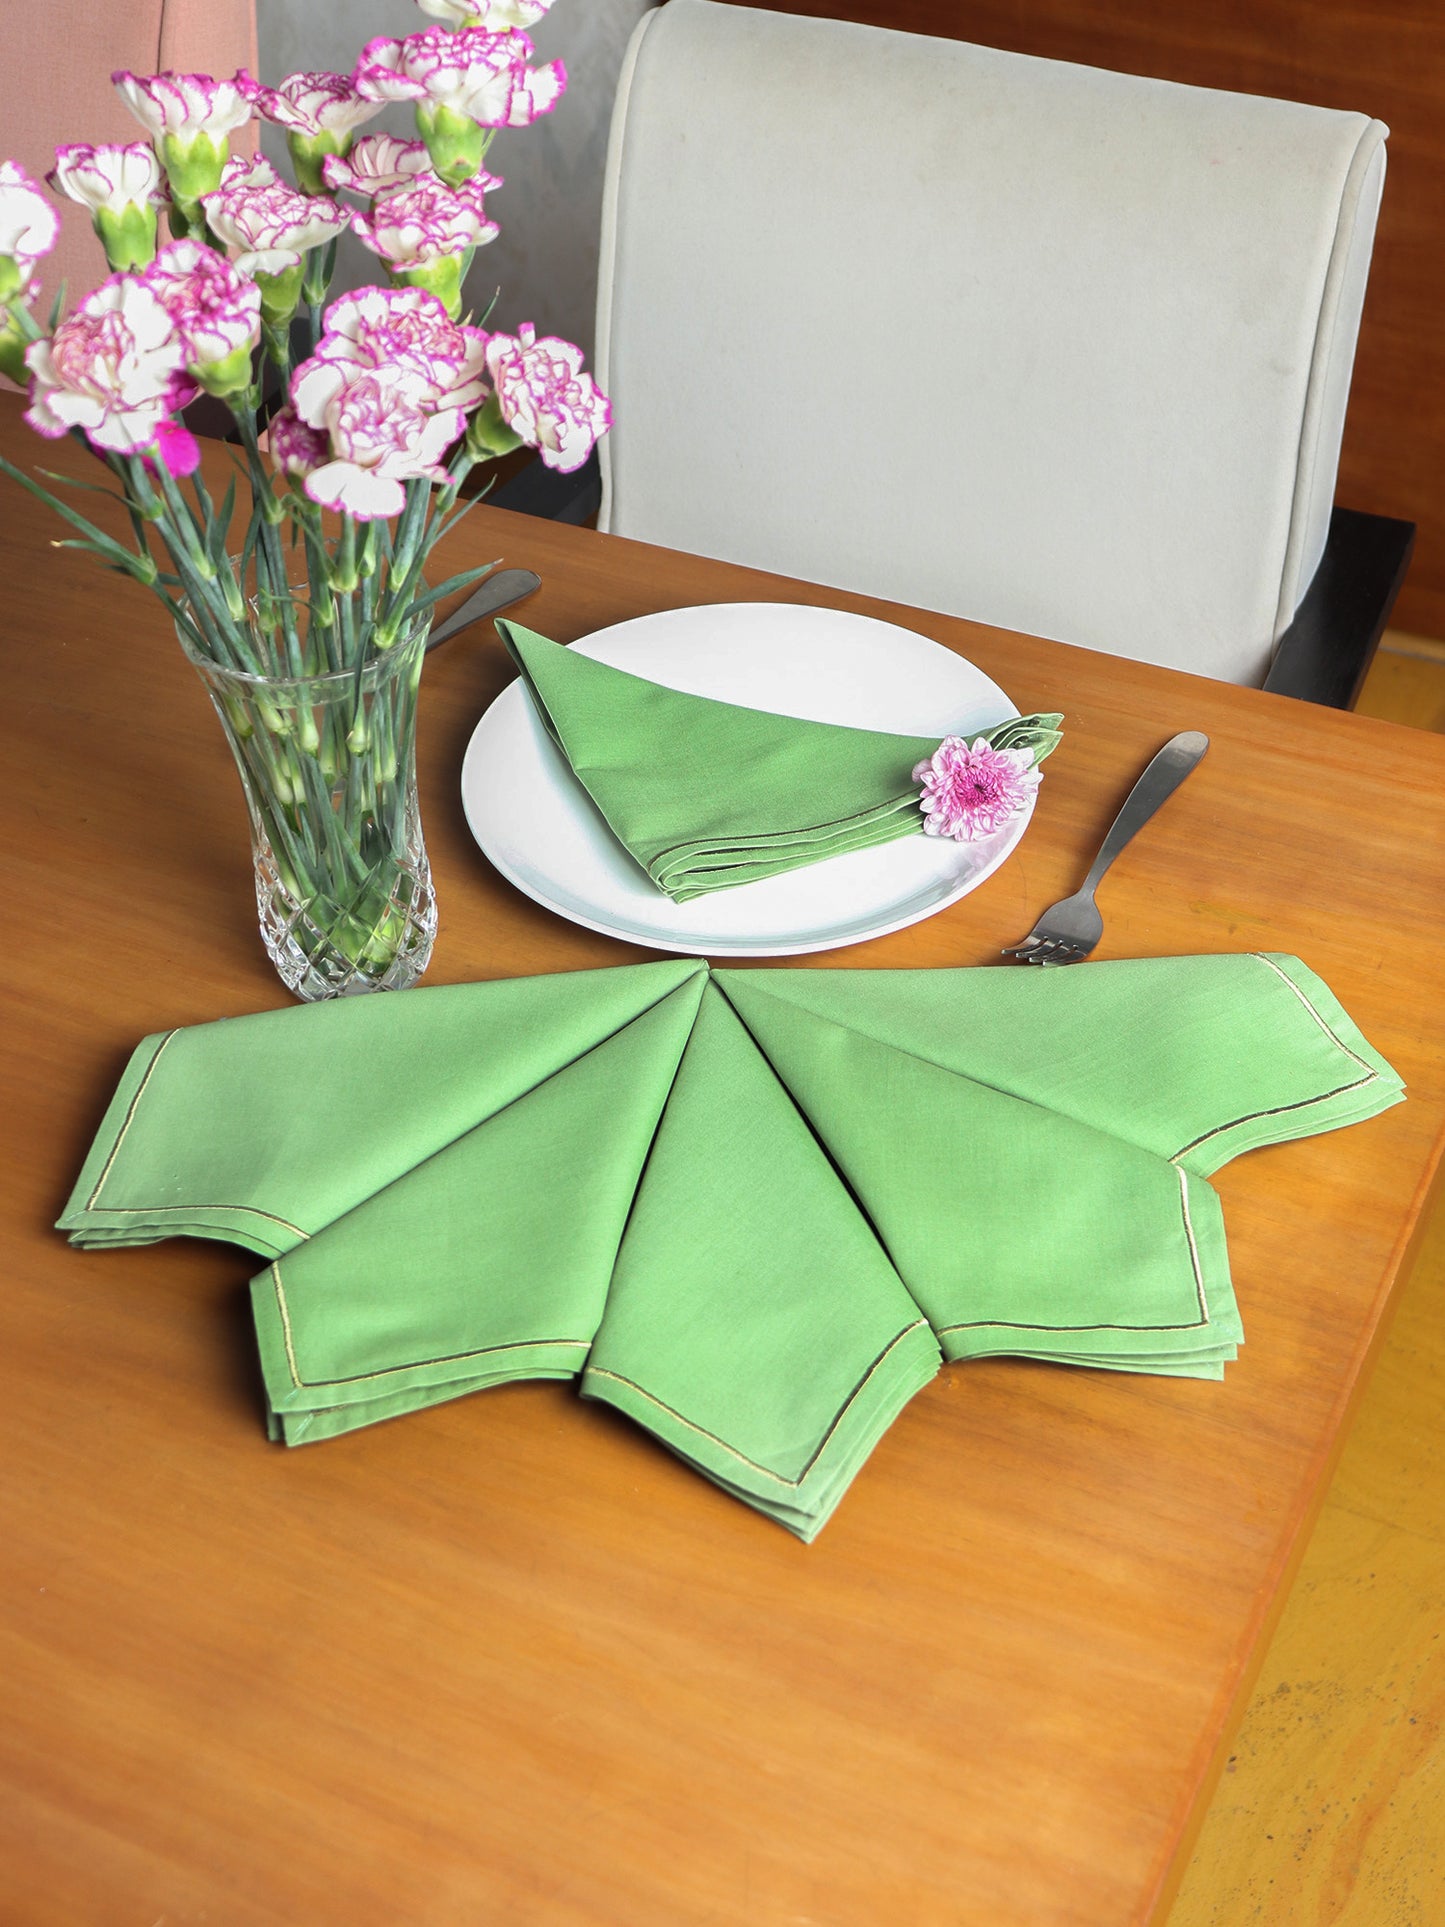 embroidered set of 6 dinner napkins in olive green color - 16x16 inch